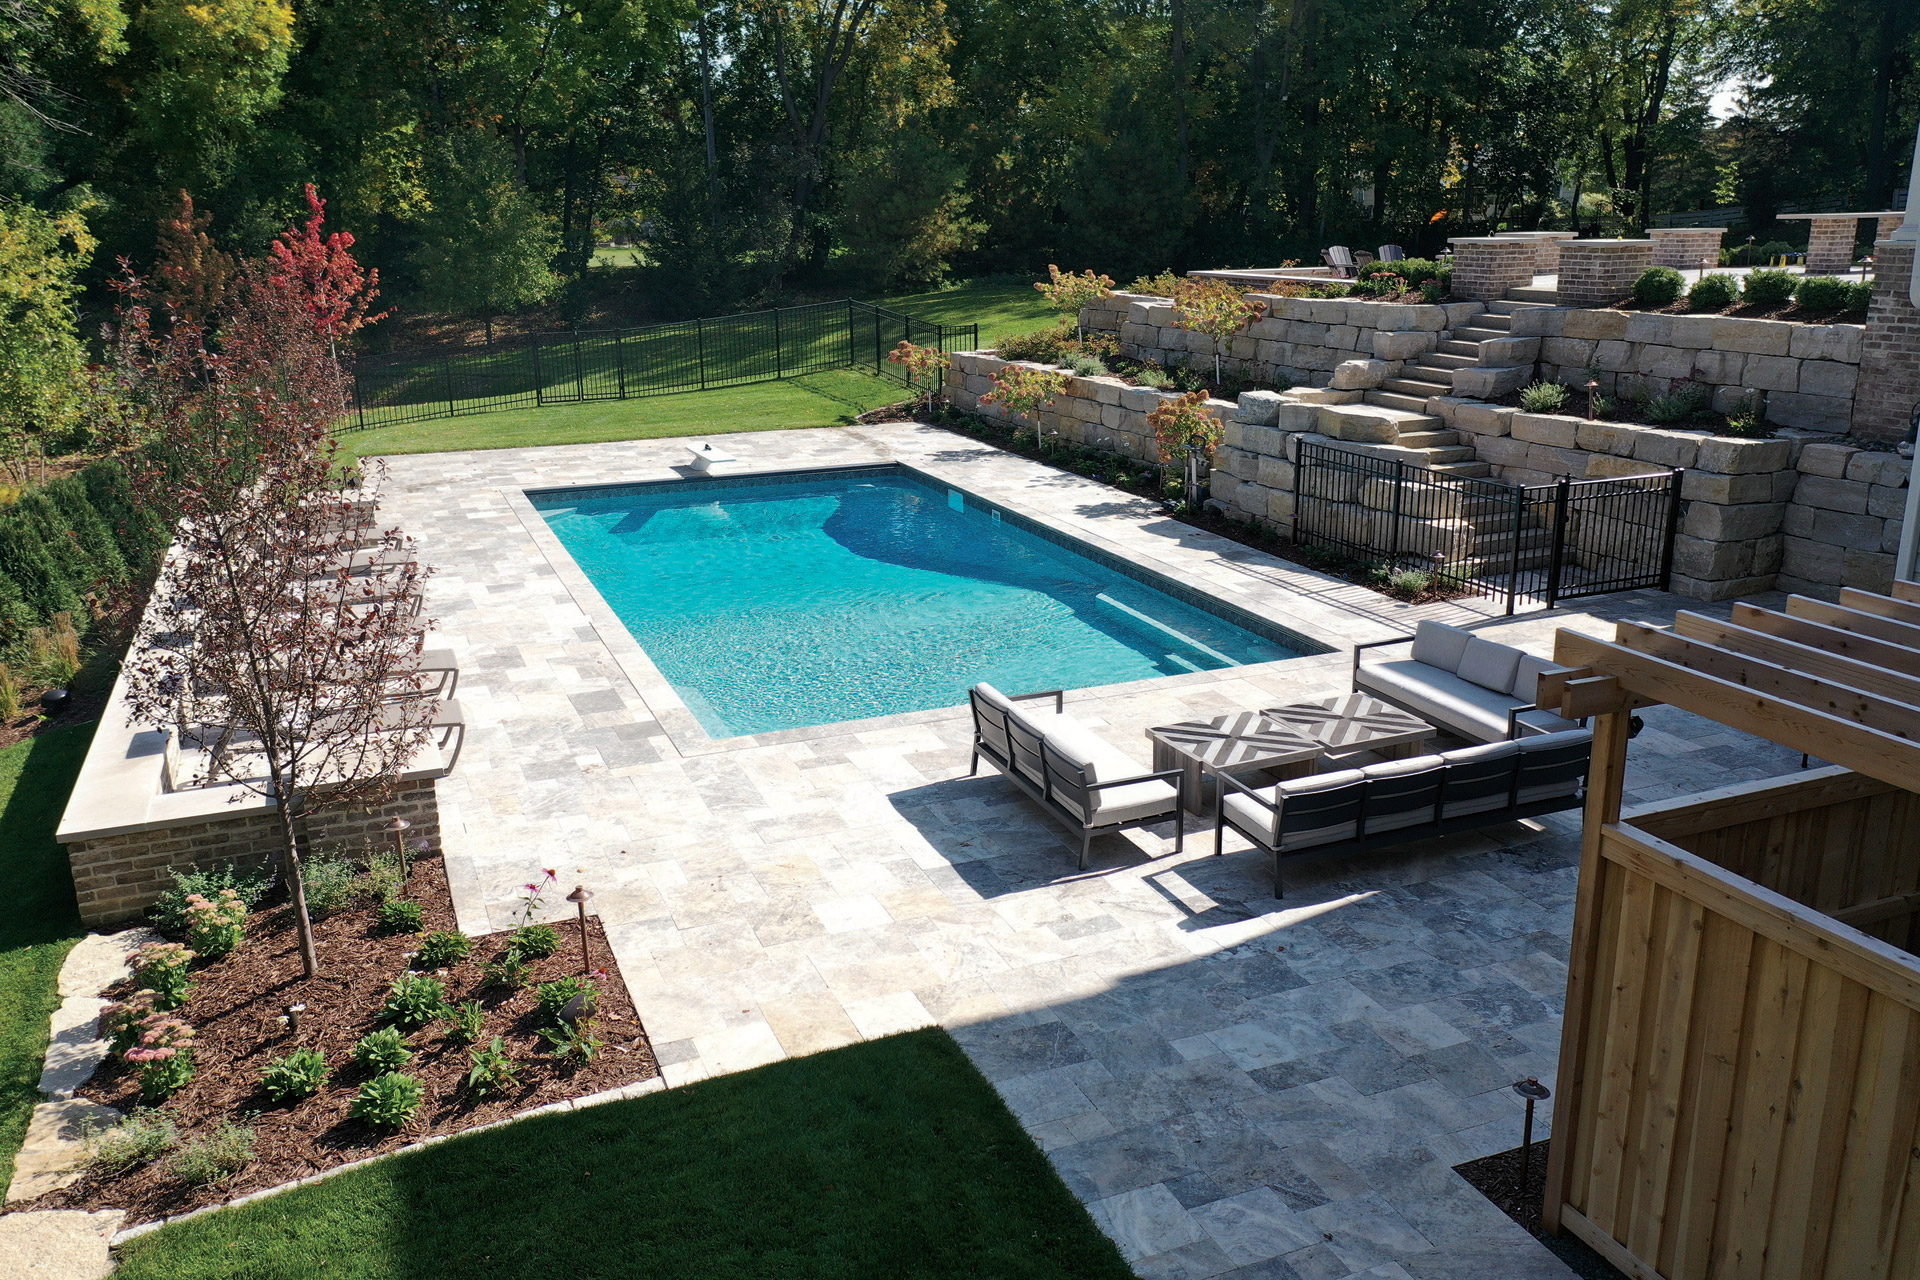 Swimming Pool and Patio Area with Travertine Tile in Edina, MN